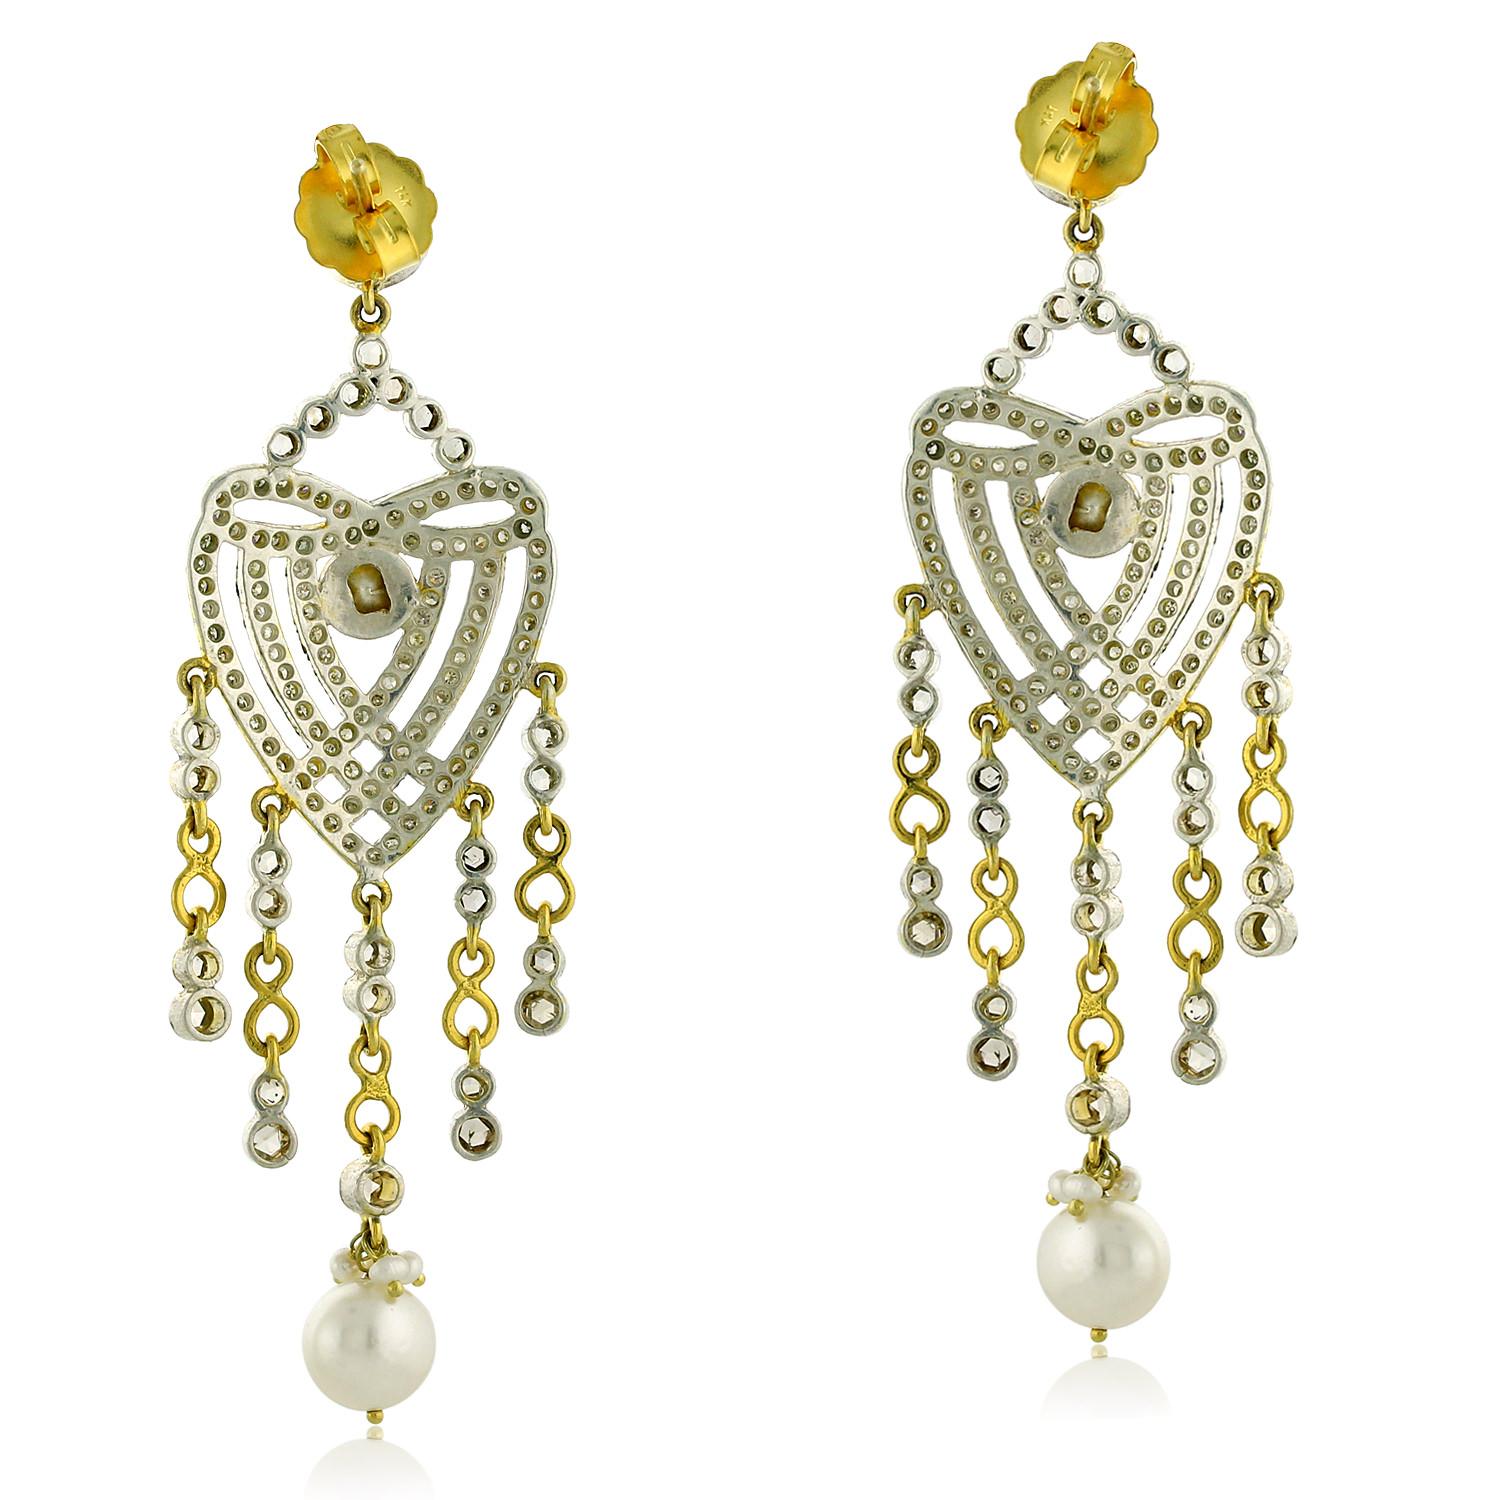 The infinity symbol is often associated with eternal love, while the heart shape is a universal symbol of love and affection. These earrings feature a mix of precious materials, including gold and silver, which adds to their appeal. The pearls and